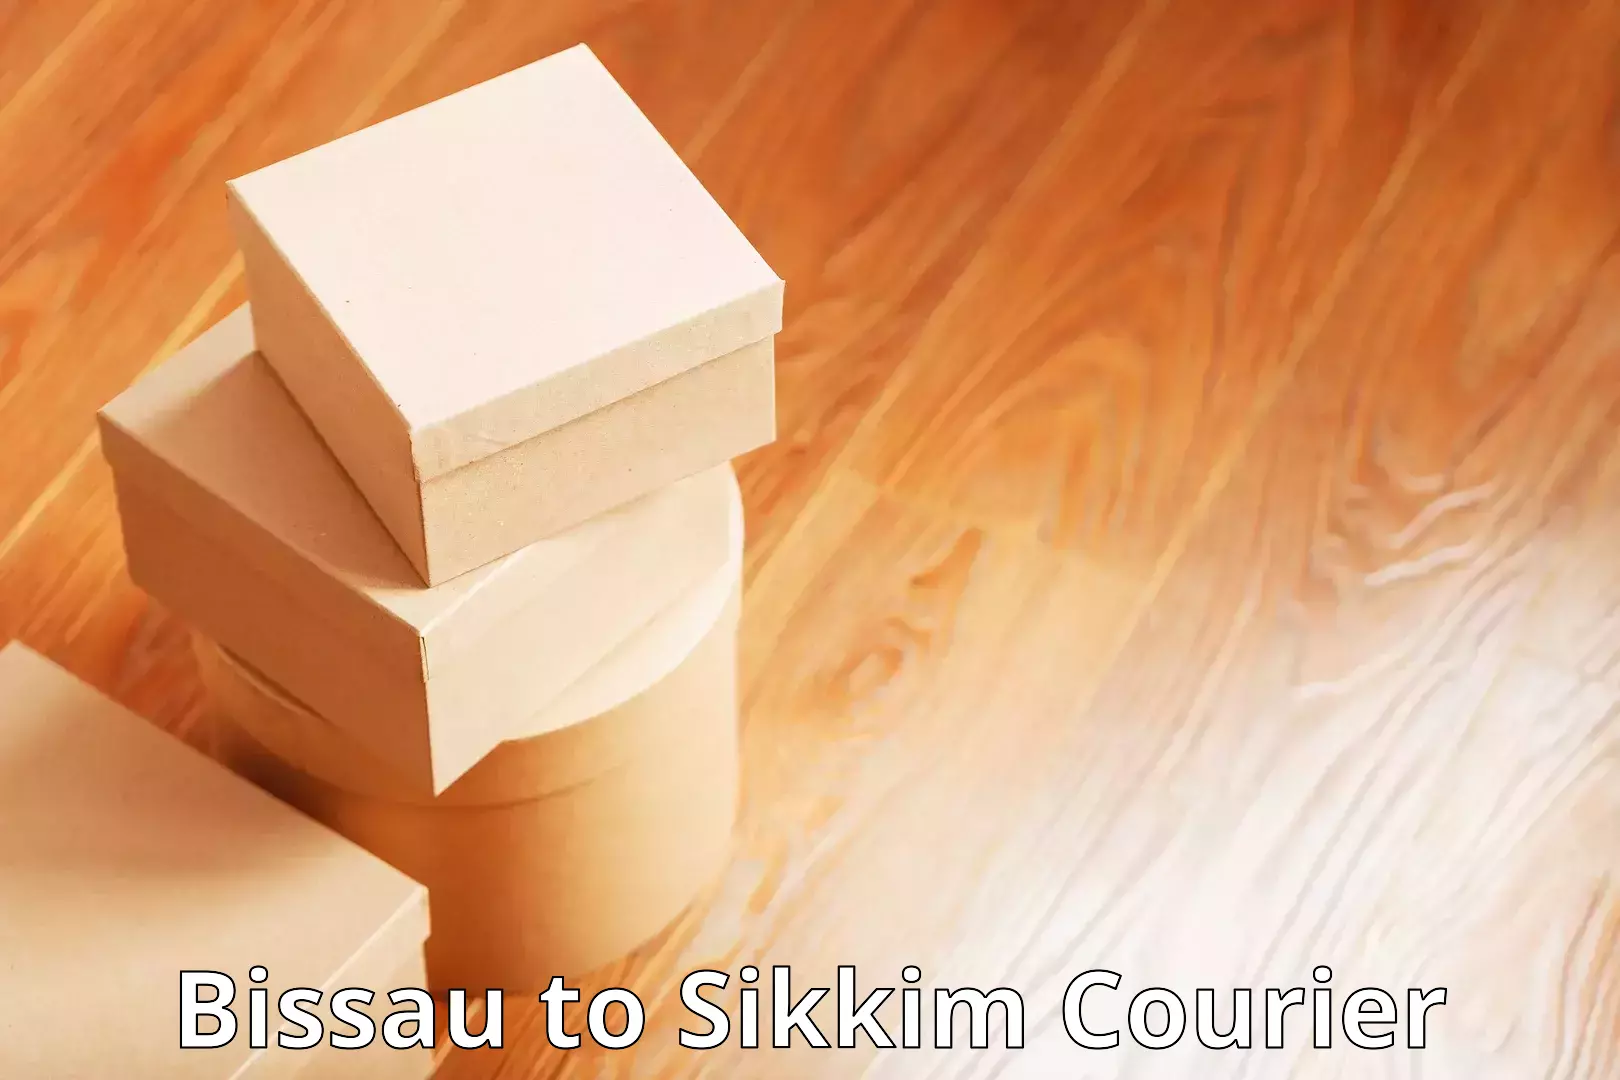 Multi-city courier Bissau to East Sikkim